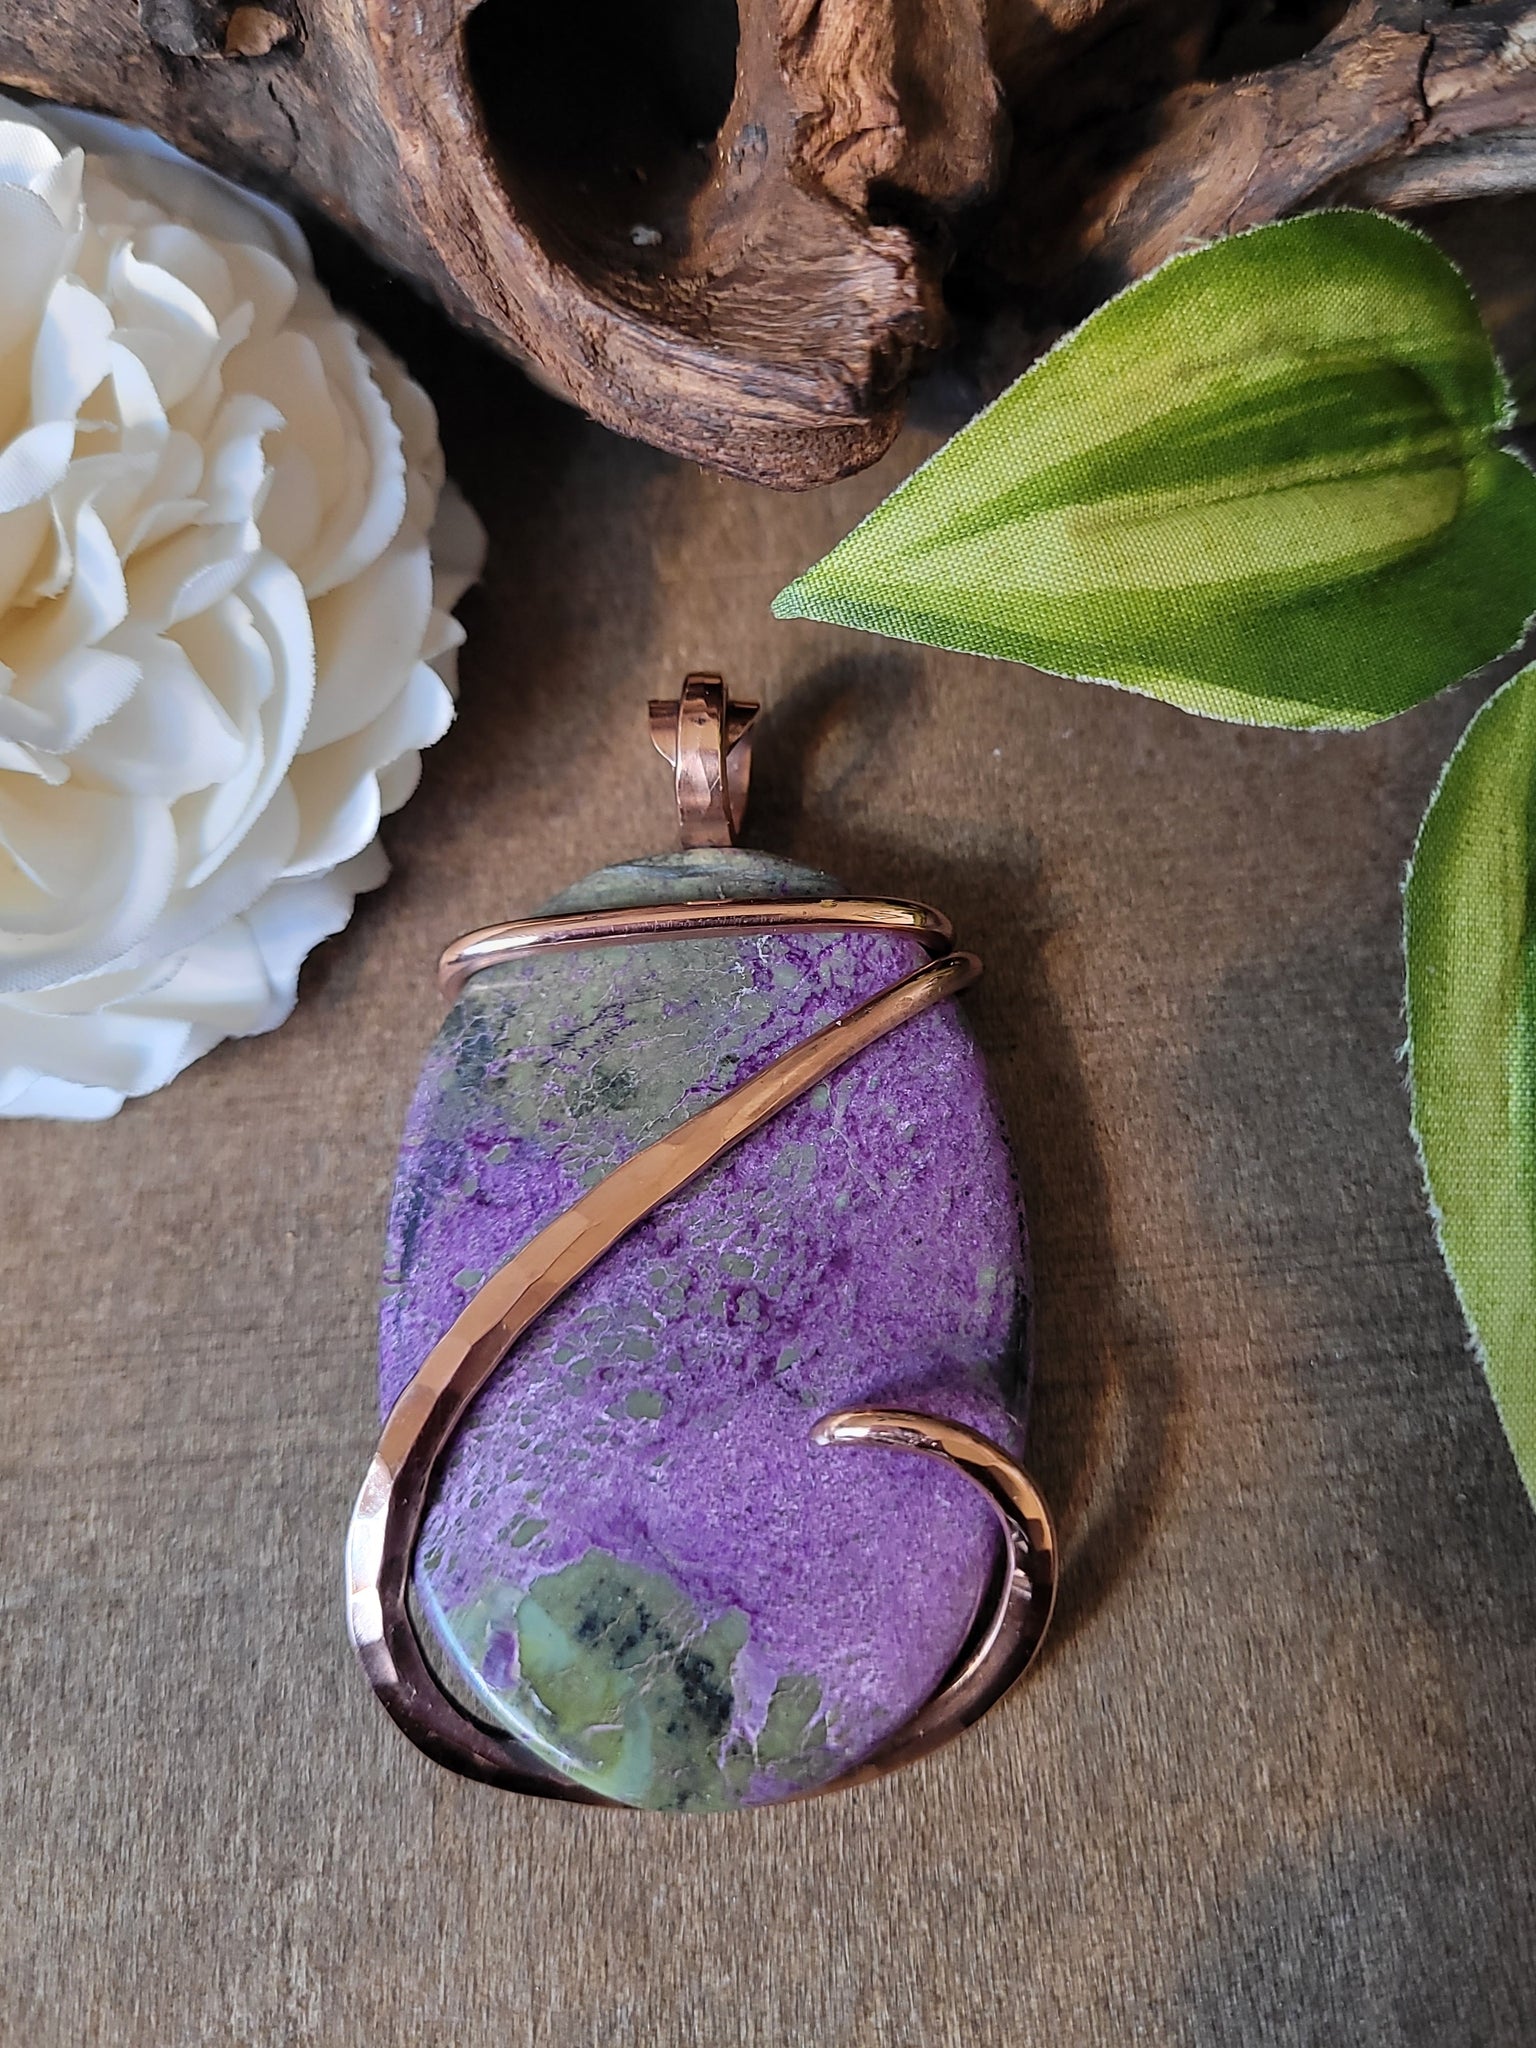 Stitchtite Natural Stone Pendant Necklace, Large Oval Shaped Stone Wire Wrapped Pendant, Copper Wire Wrap Necklace, Purple and Green Stone Necklace